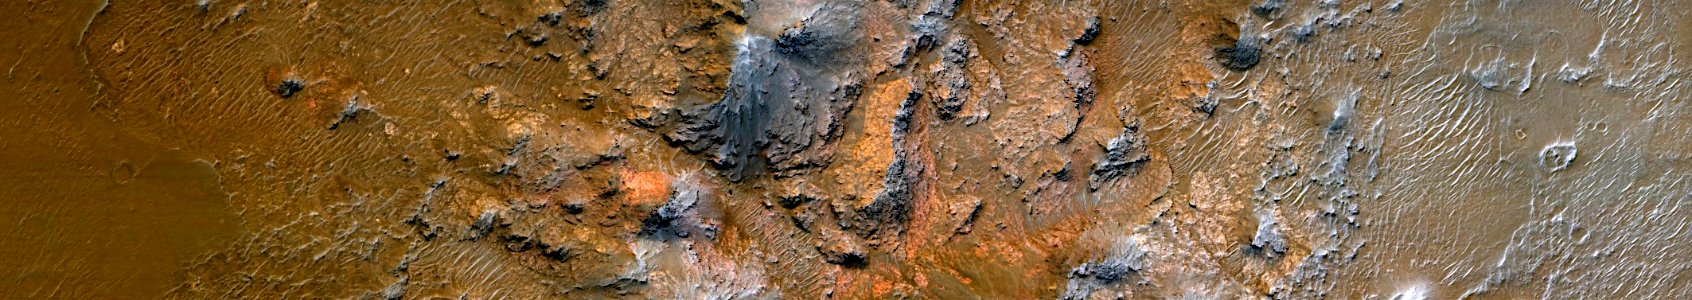 Mars - Central Peak of Taxco Crater photo